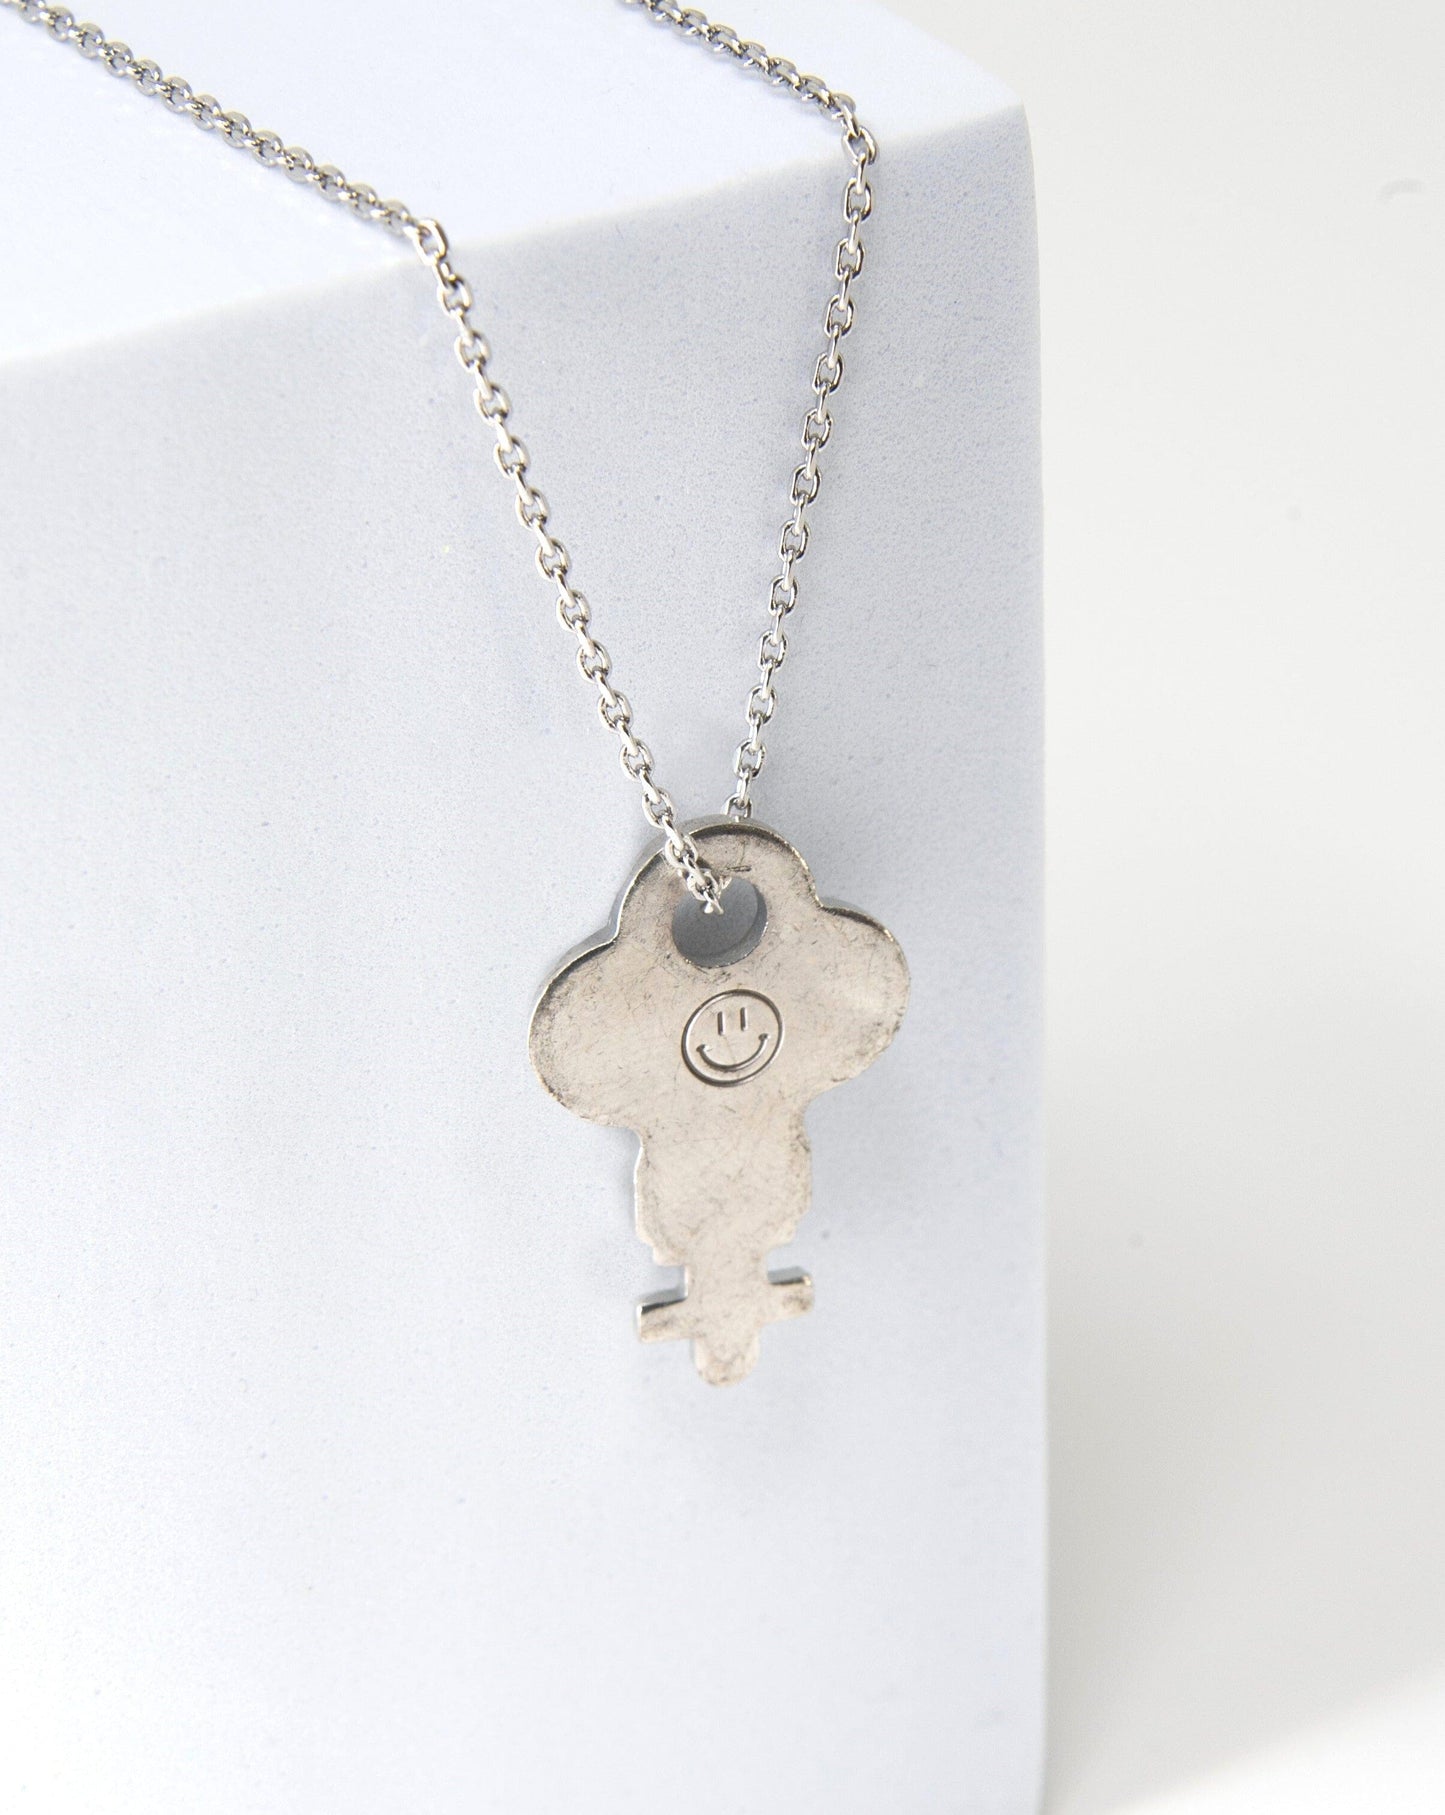 Symbol Dainty Key Necklace Necklaces The Giving Keys Dainty Silver 